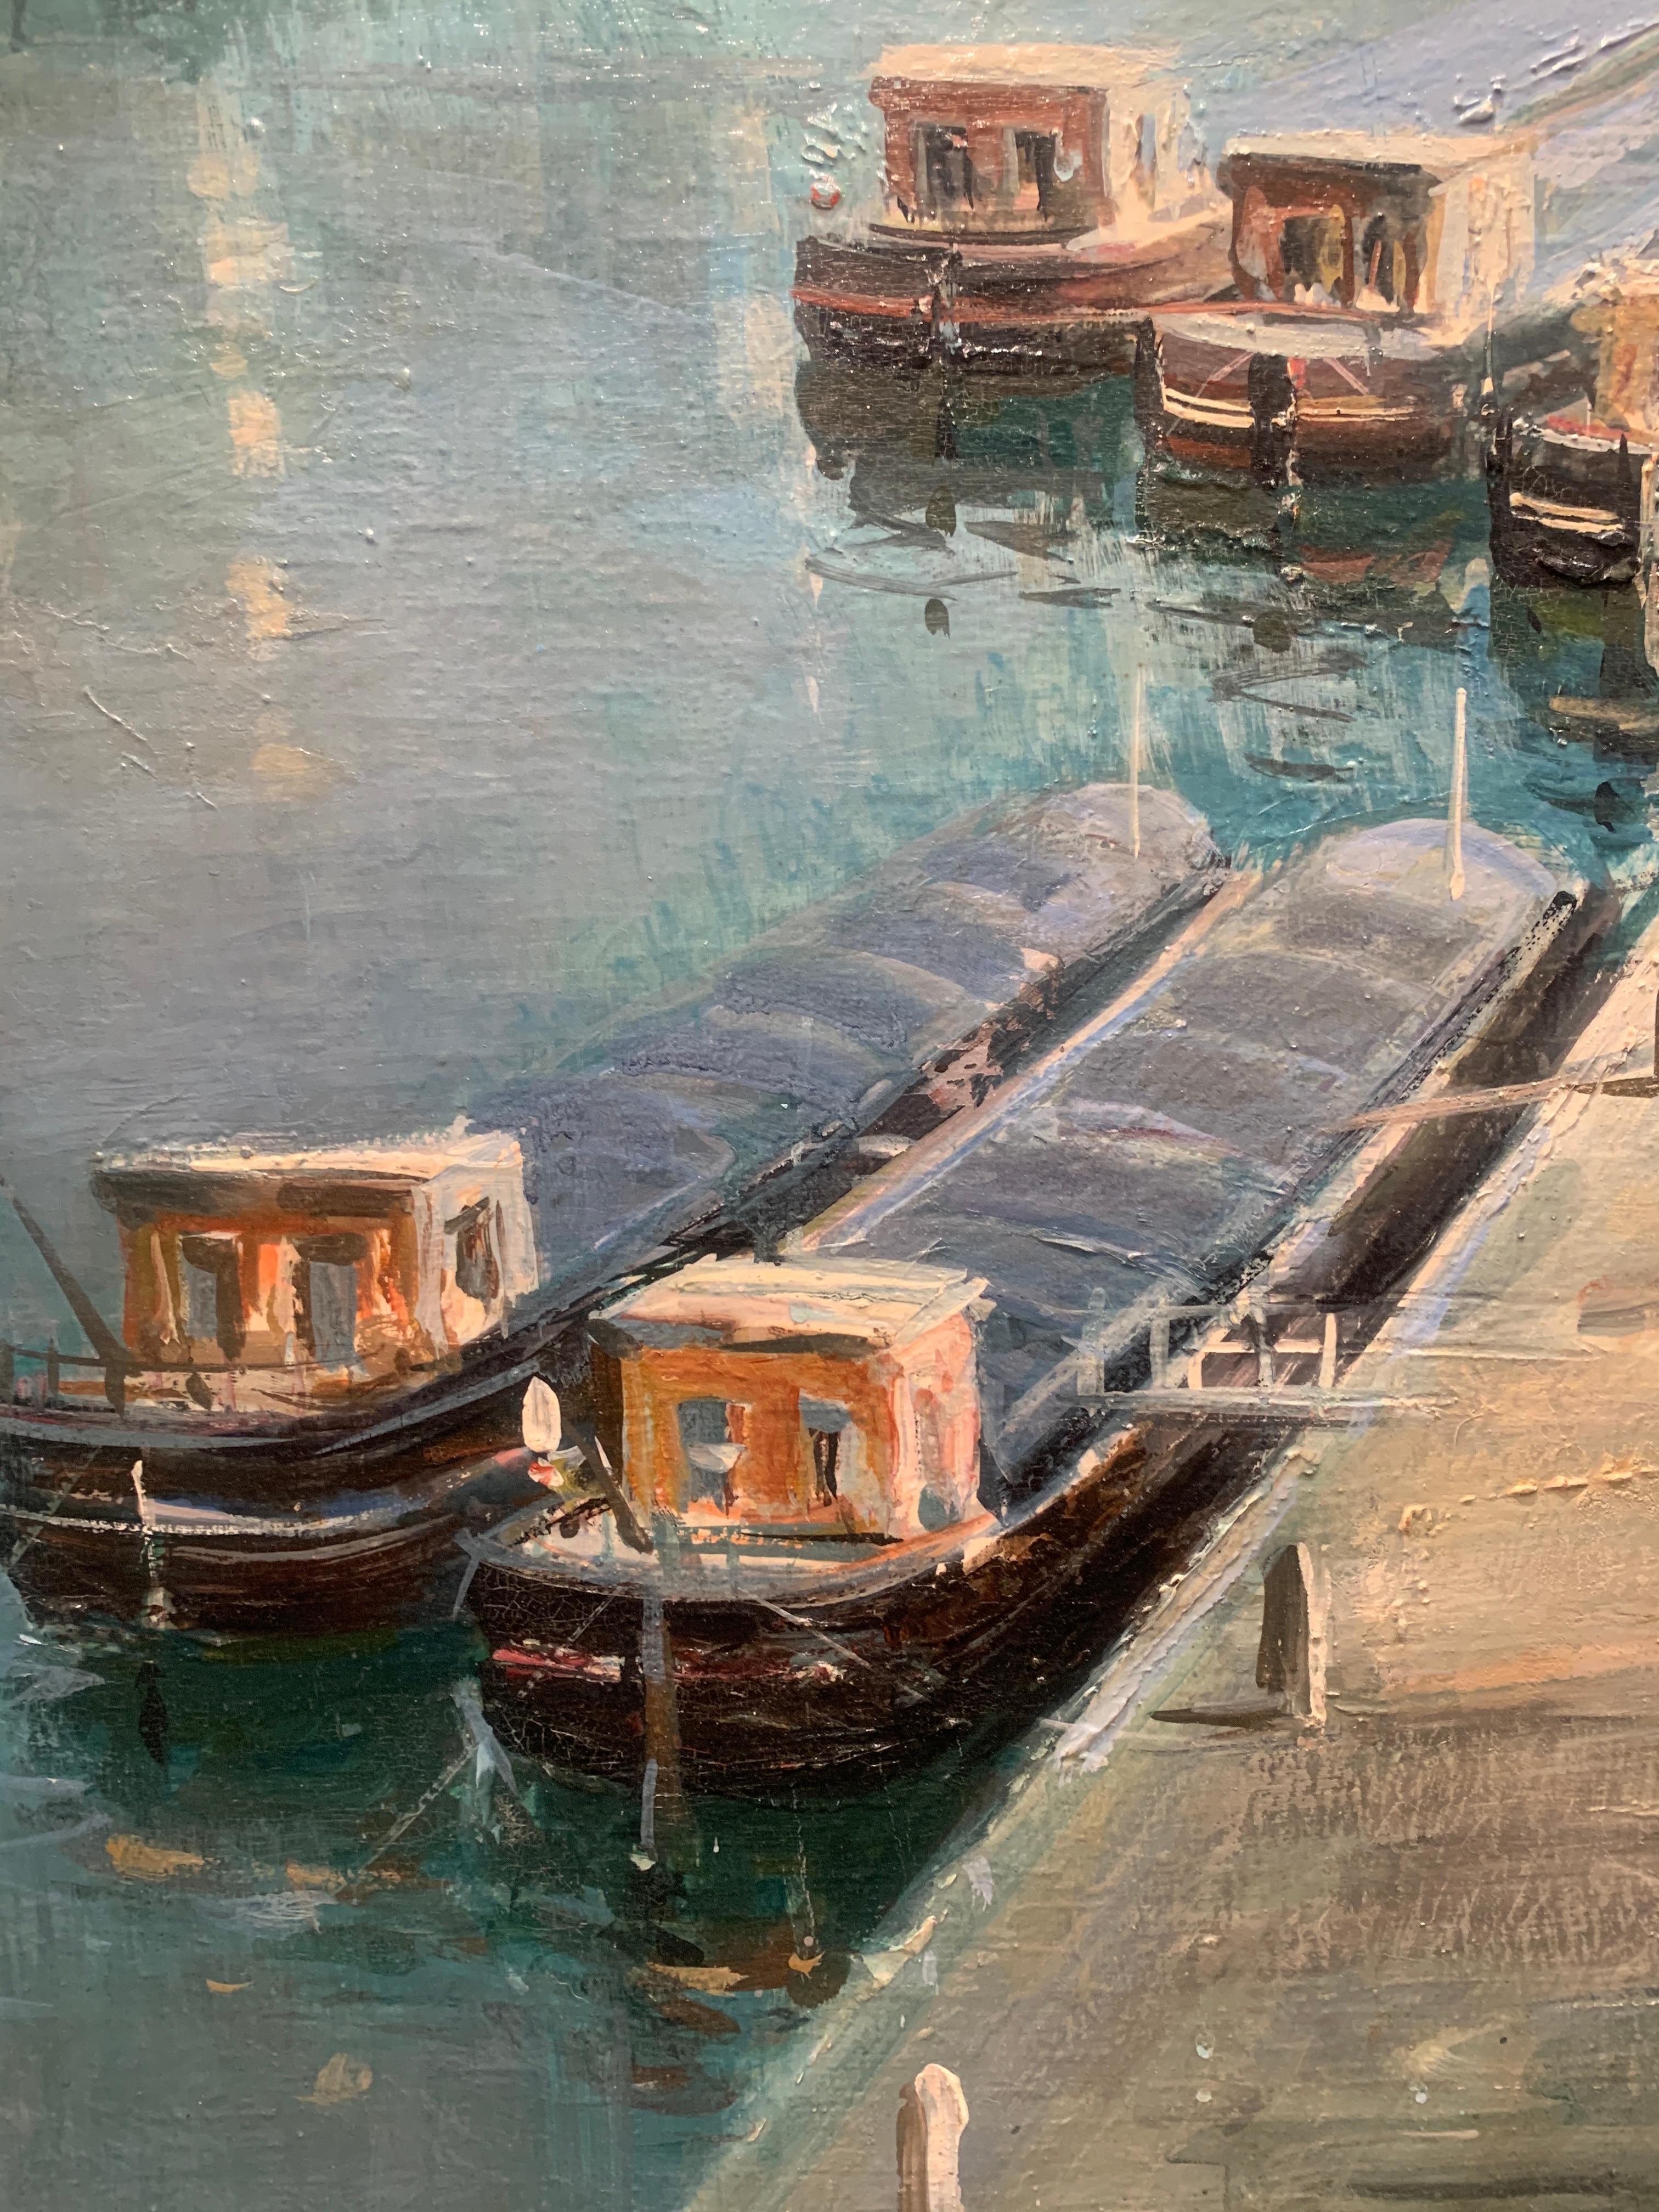 Lucien Delarue is known internationally as an artist who faithfully captures the romantic moods of Paris. His famous subject of the 'Barges by the Dock,'' along with other Paris scenes, compliment his romantic renderings of the South of France. The